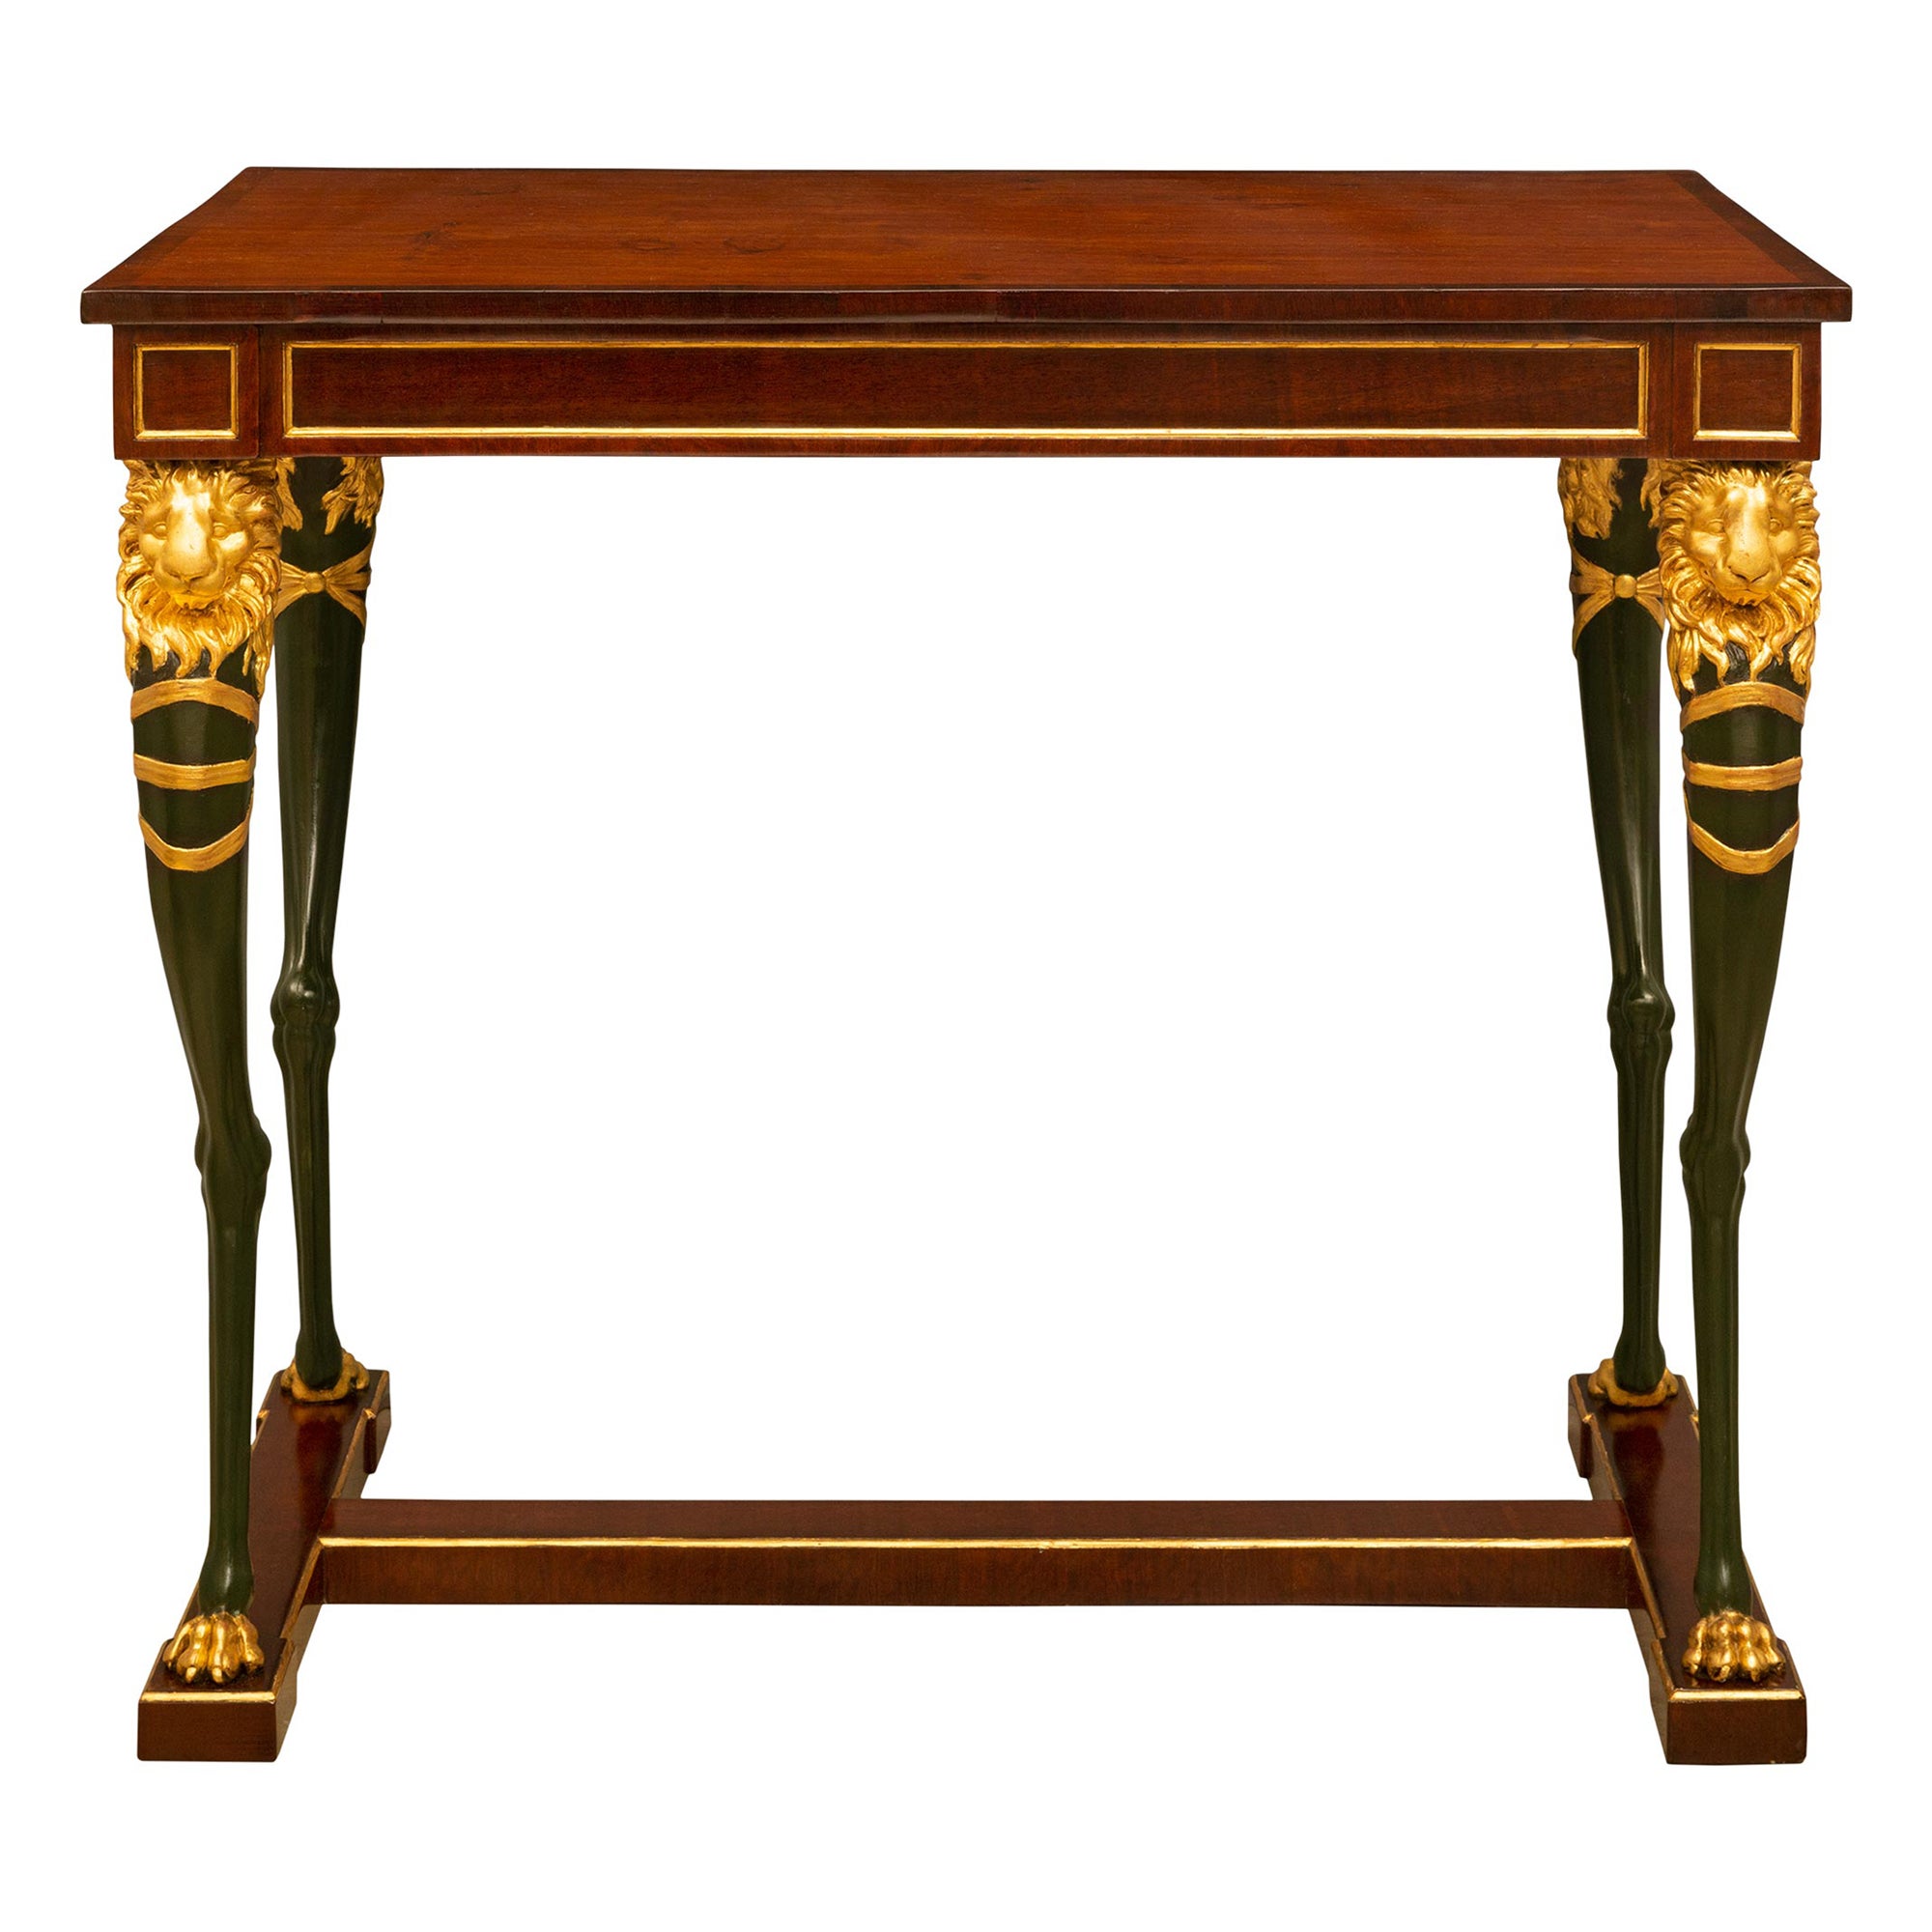 Swedish 19th Century Empire St. Mahogany, Polychrome and Giltwood Center Table For Sale